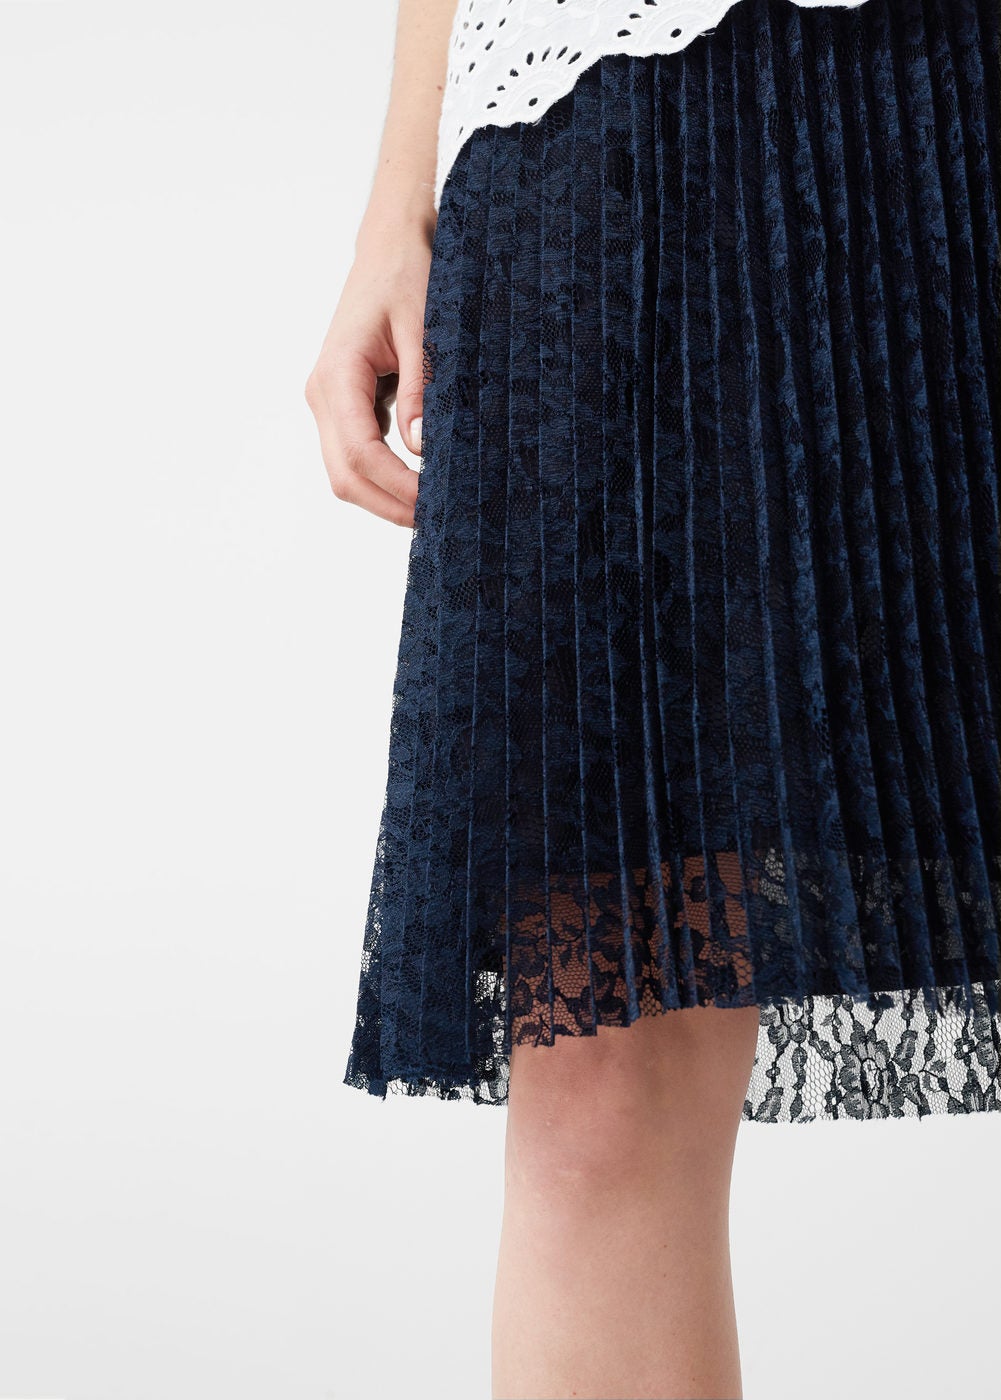 You’ll Love These 10 Pleated Skirts for Fall
